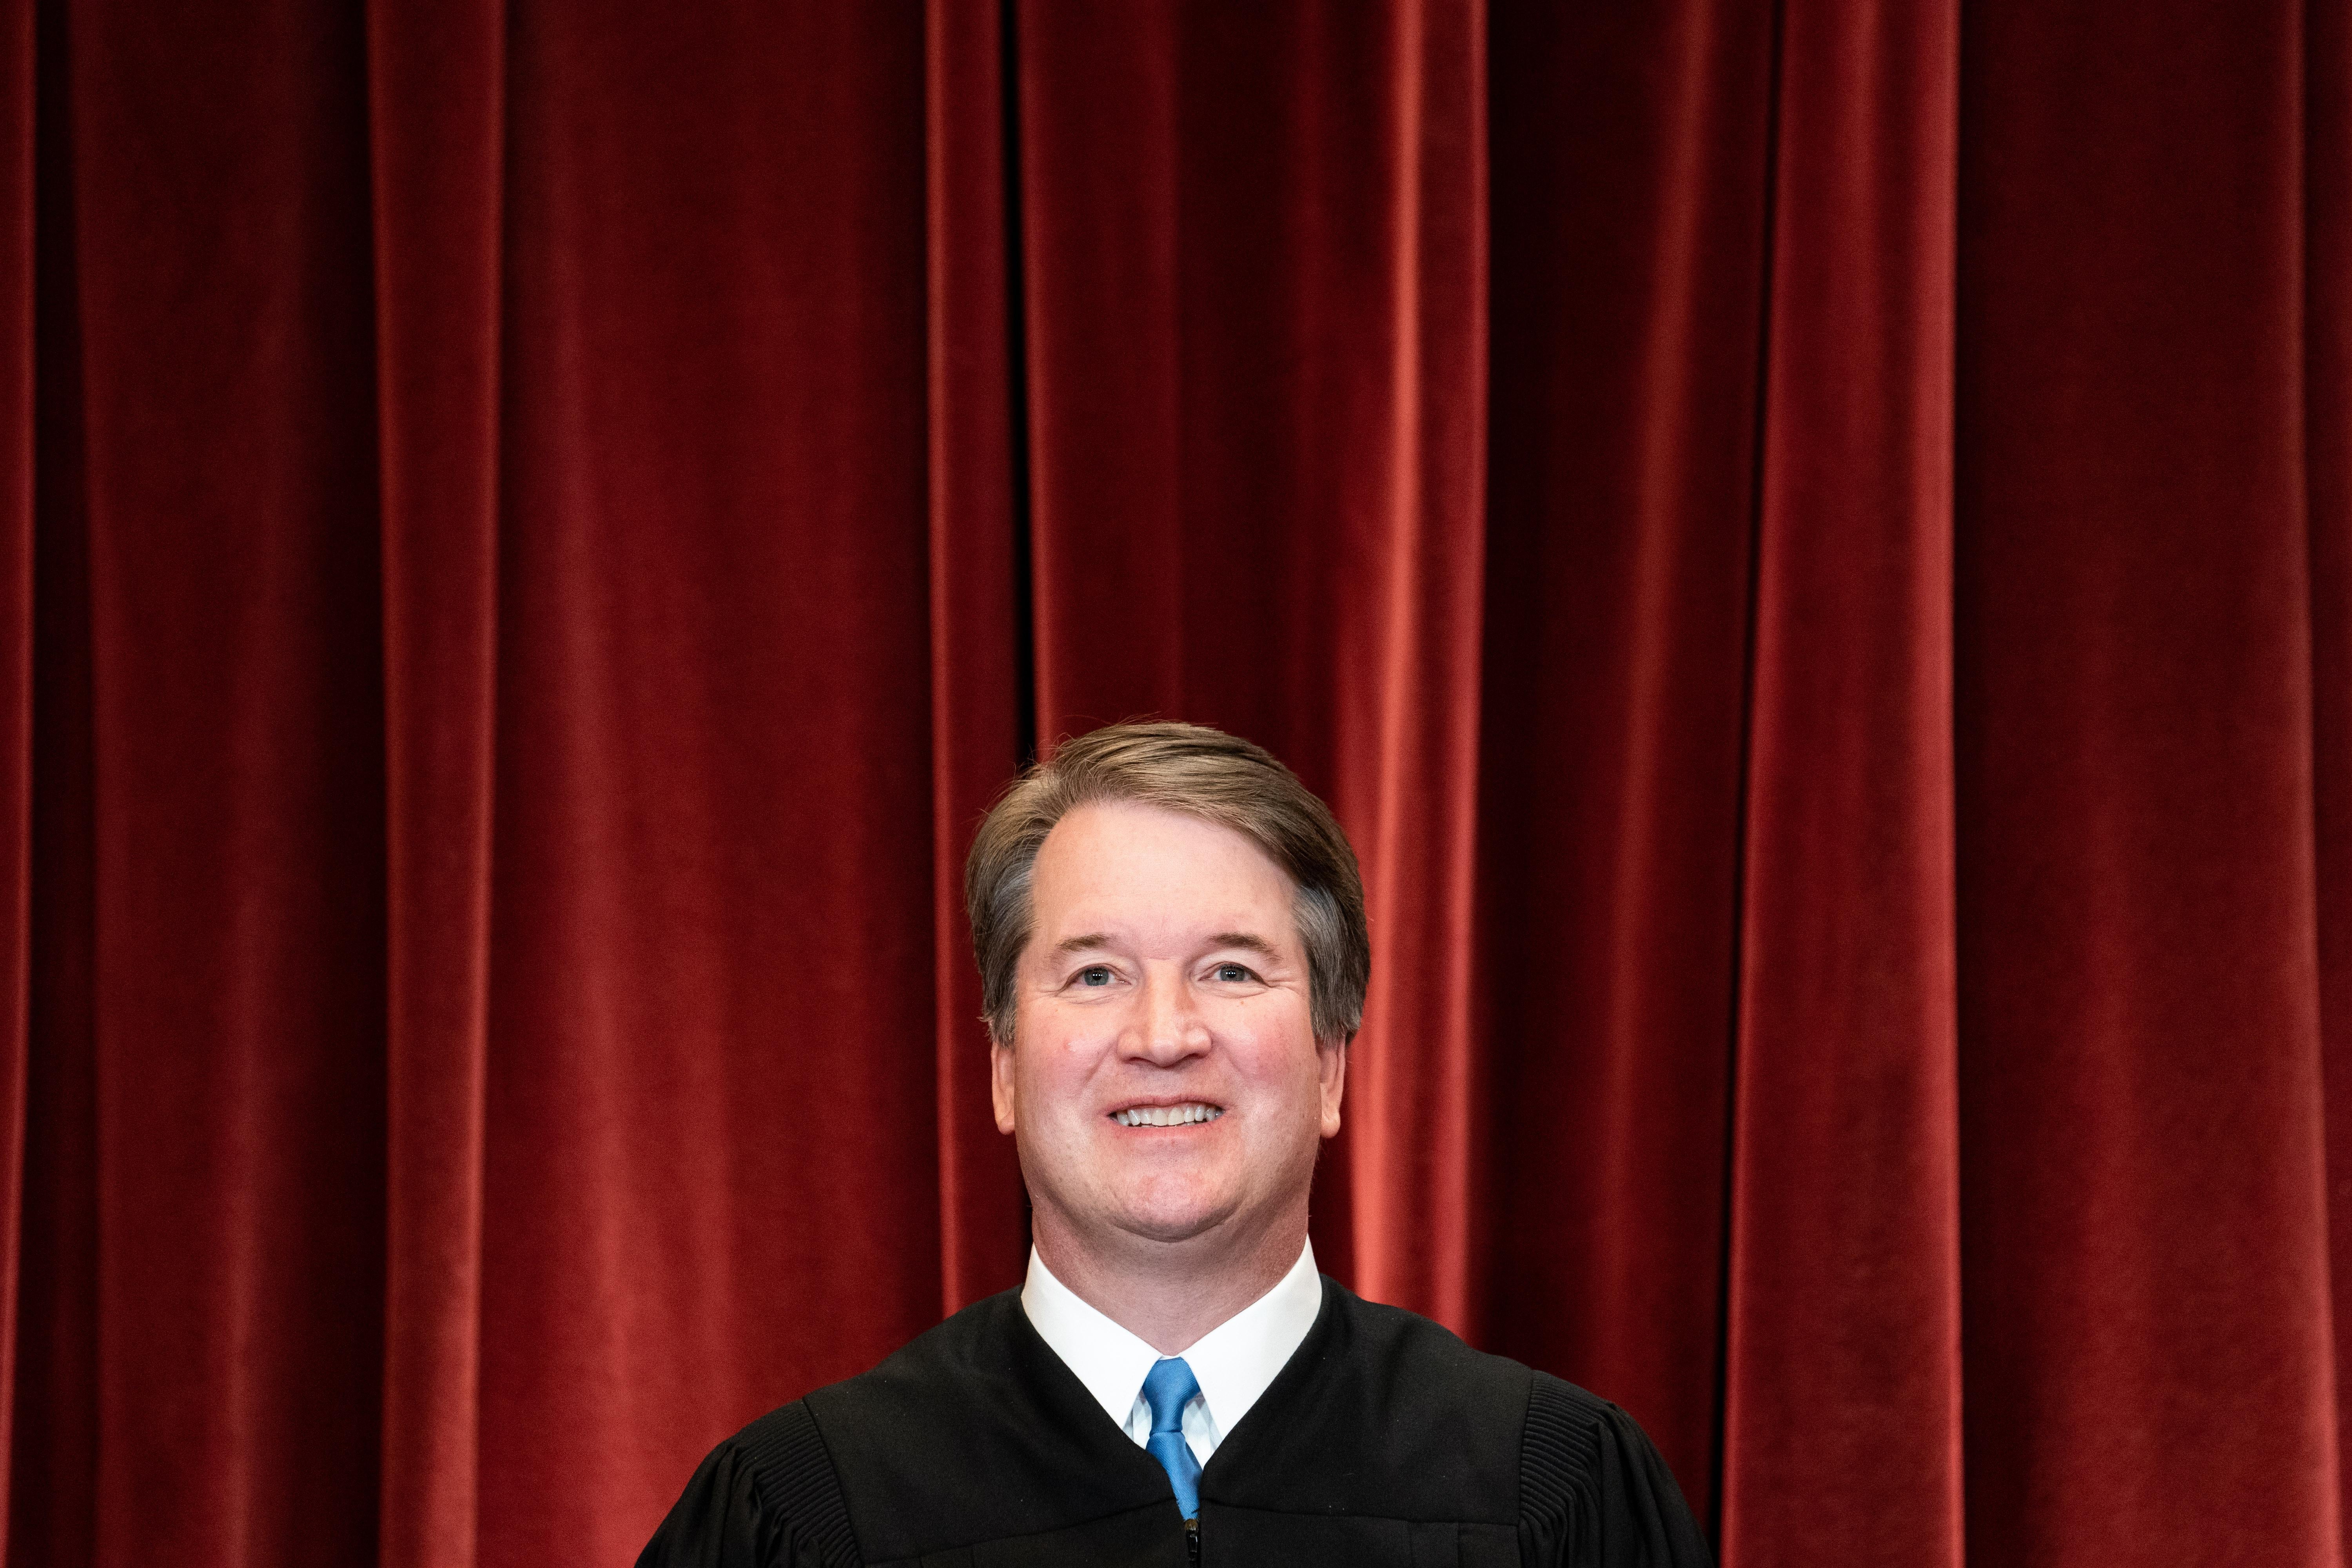 Kavanaugh smiling in his robes in front of a red curtain